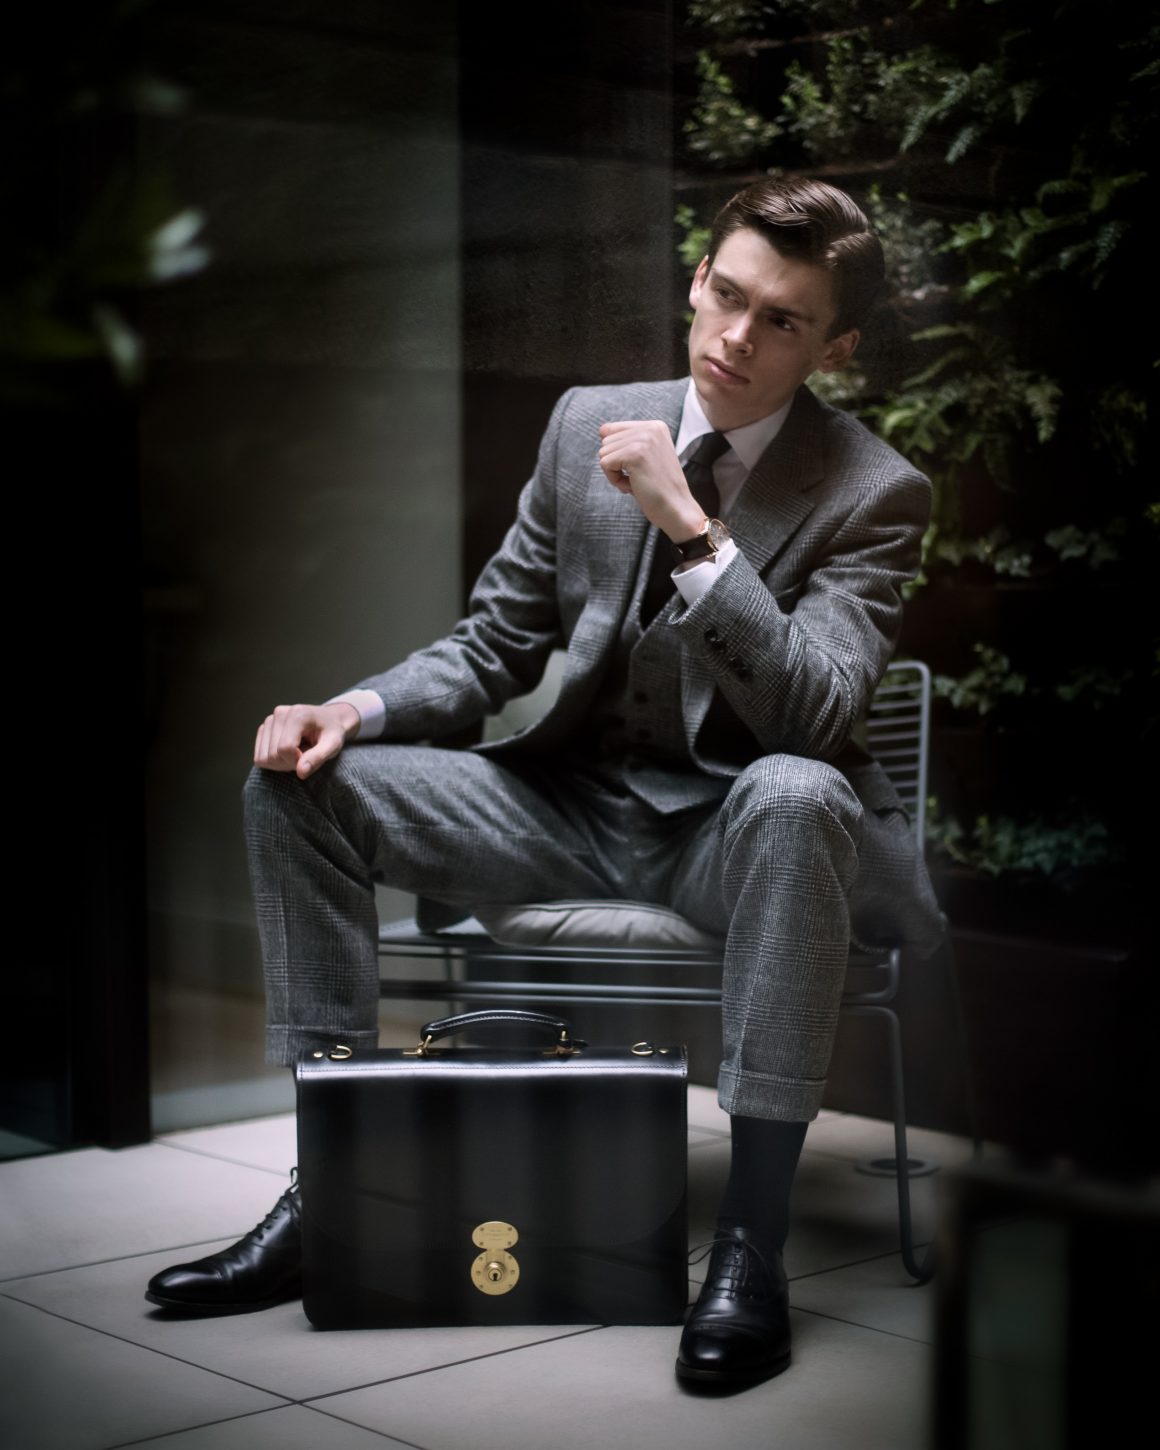 Mathias le Fevre with Ettinger London - Heritage, Westminster Flap-Over Briefcase - wearing Gieves & Hawkes Made to Measure suit